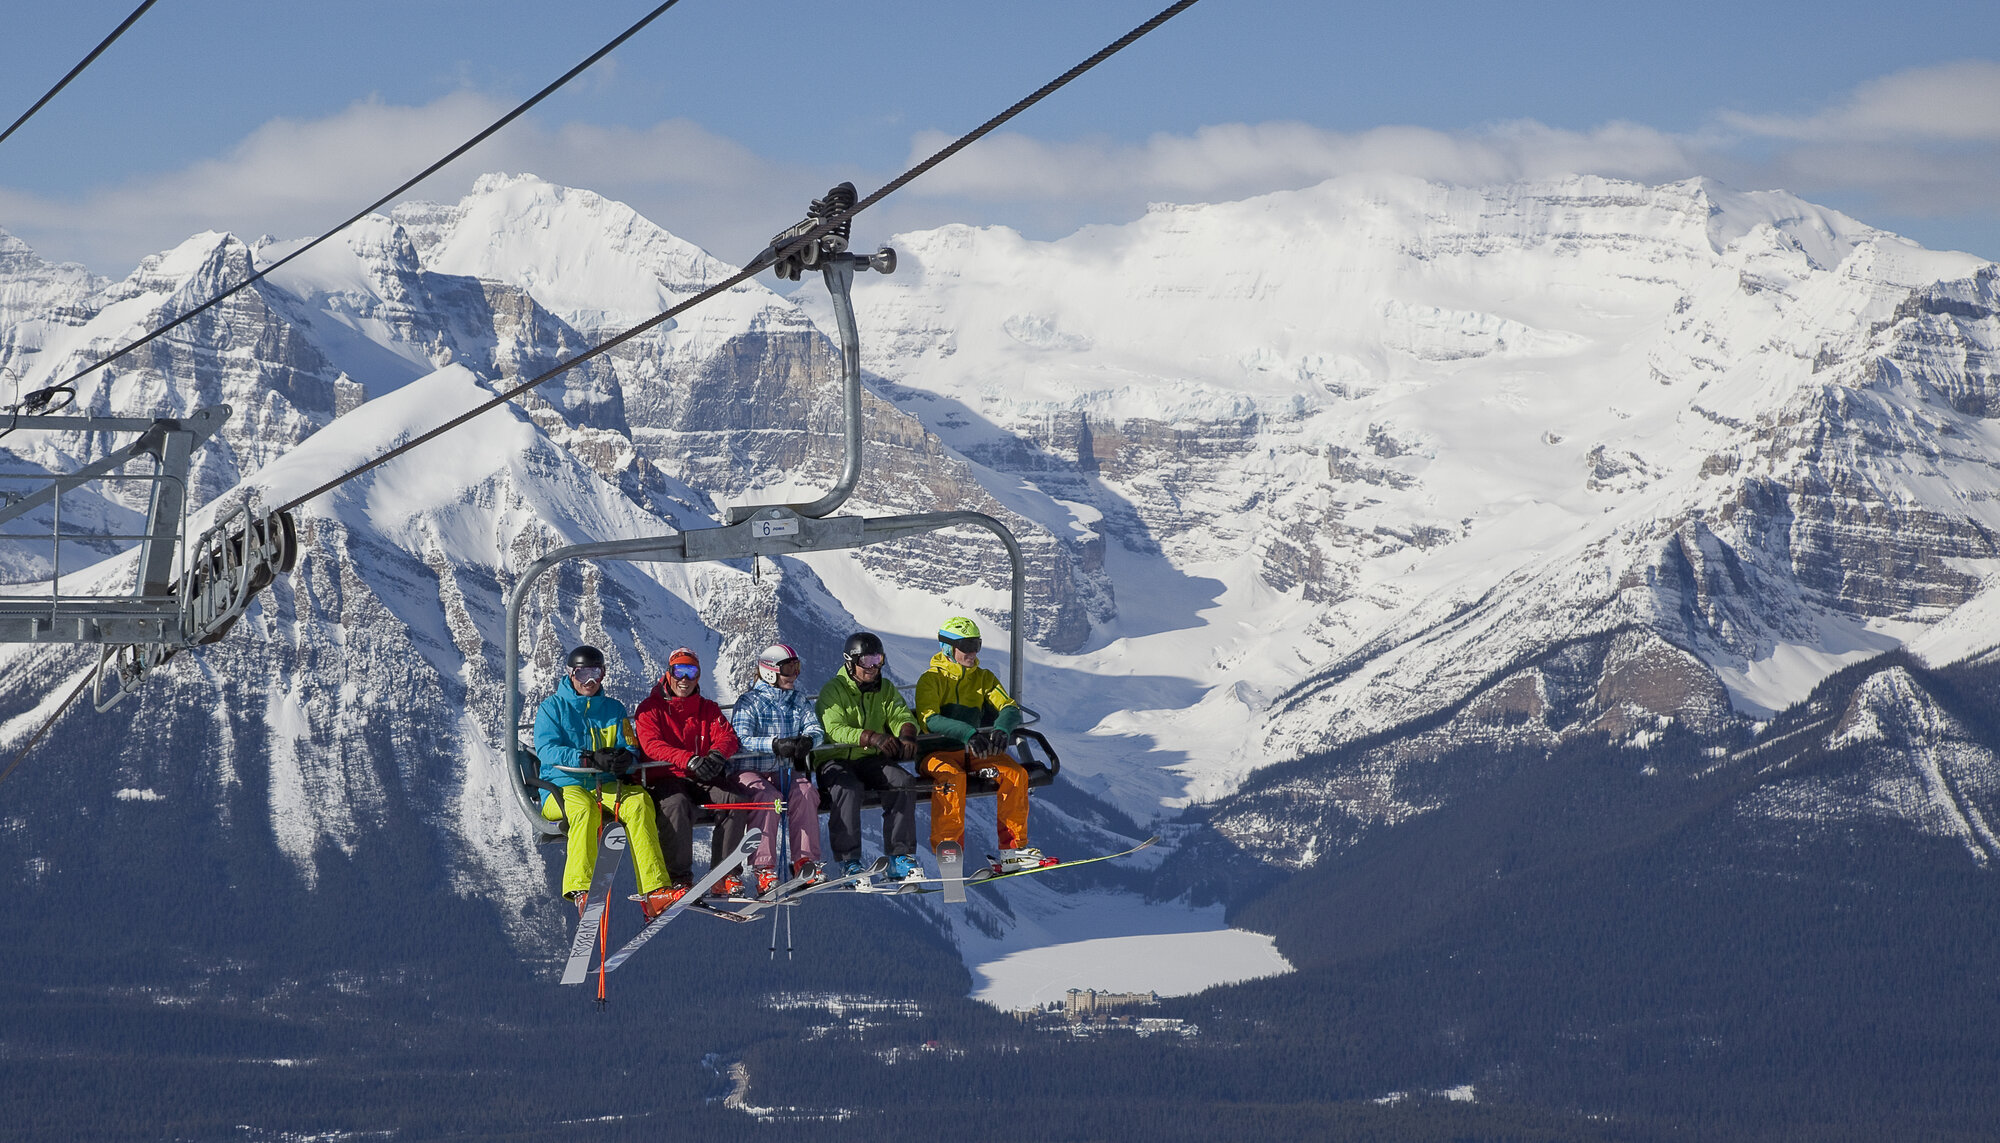 Skiers on a chairlift at Lake Louise Ski Resort